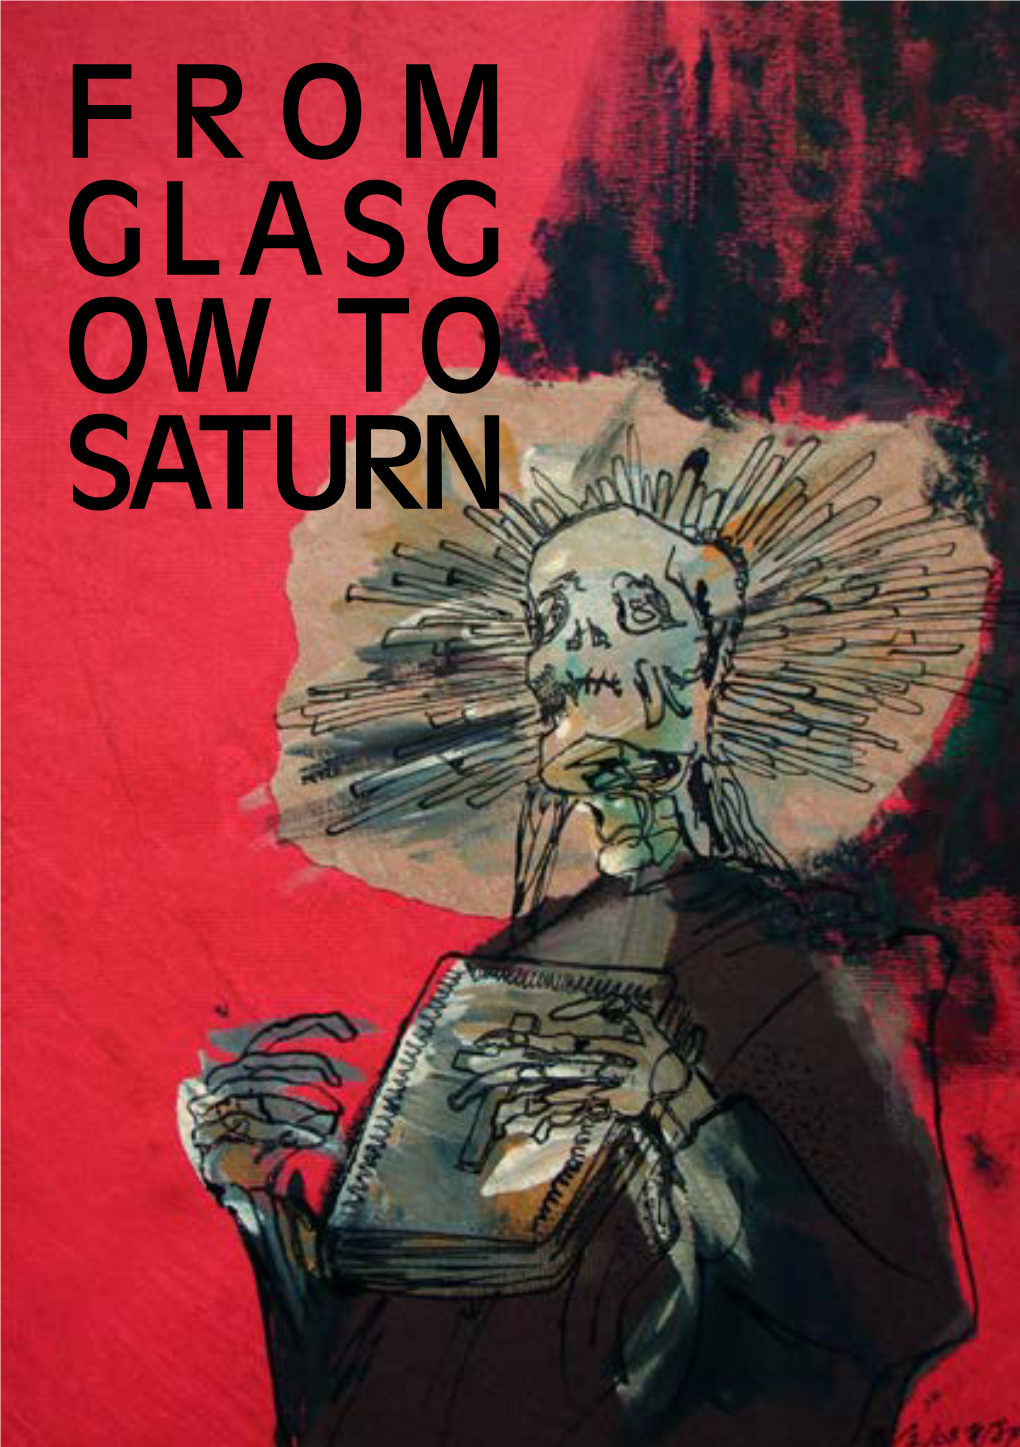 Issue 33 of from Glasgow to Saturn, Our Second As Editorial Team, and the First on Paper